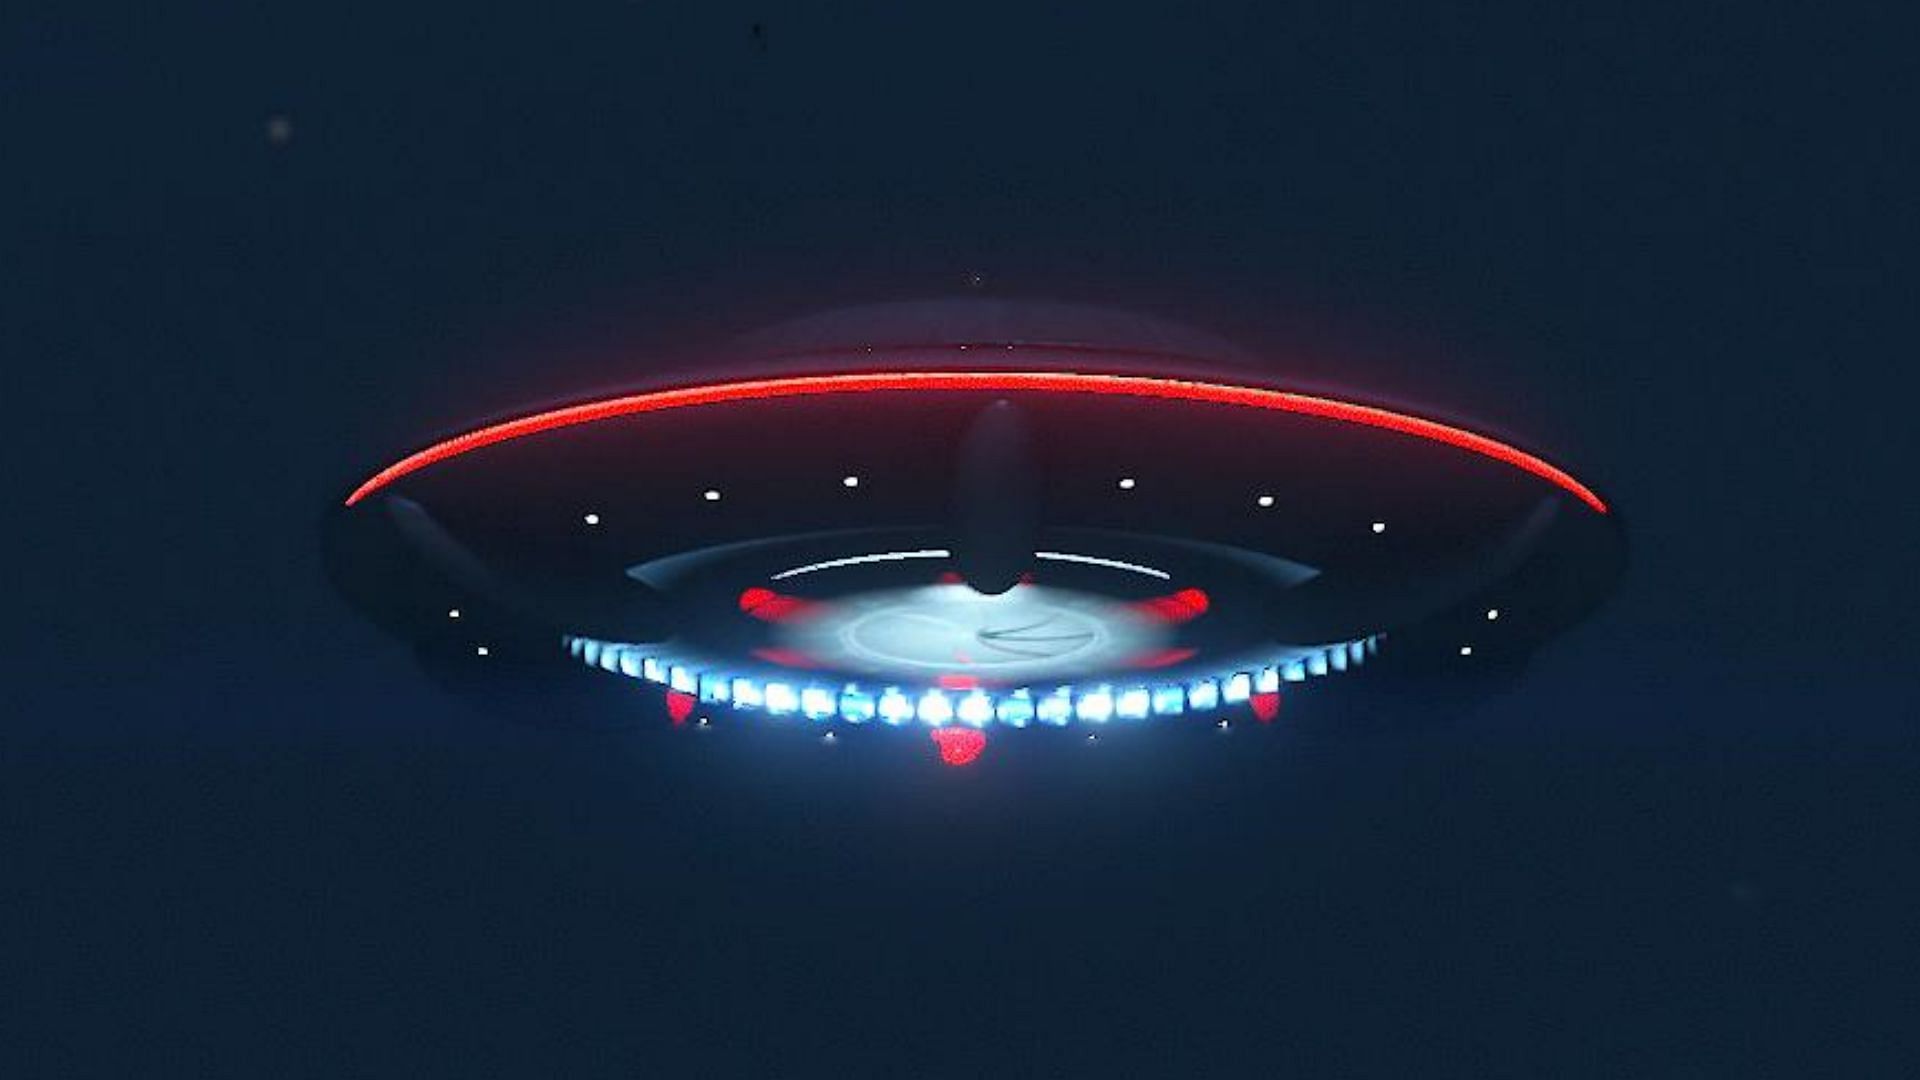 How to use an interactive map to find all UFO locations in GTA Online